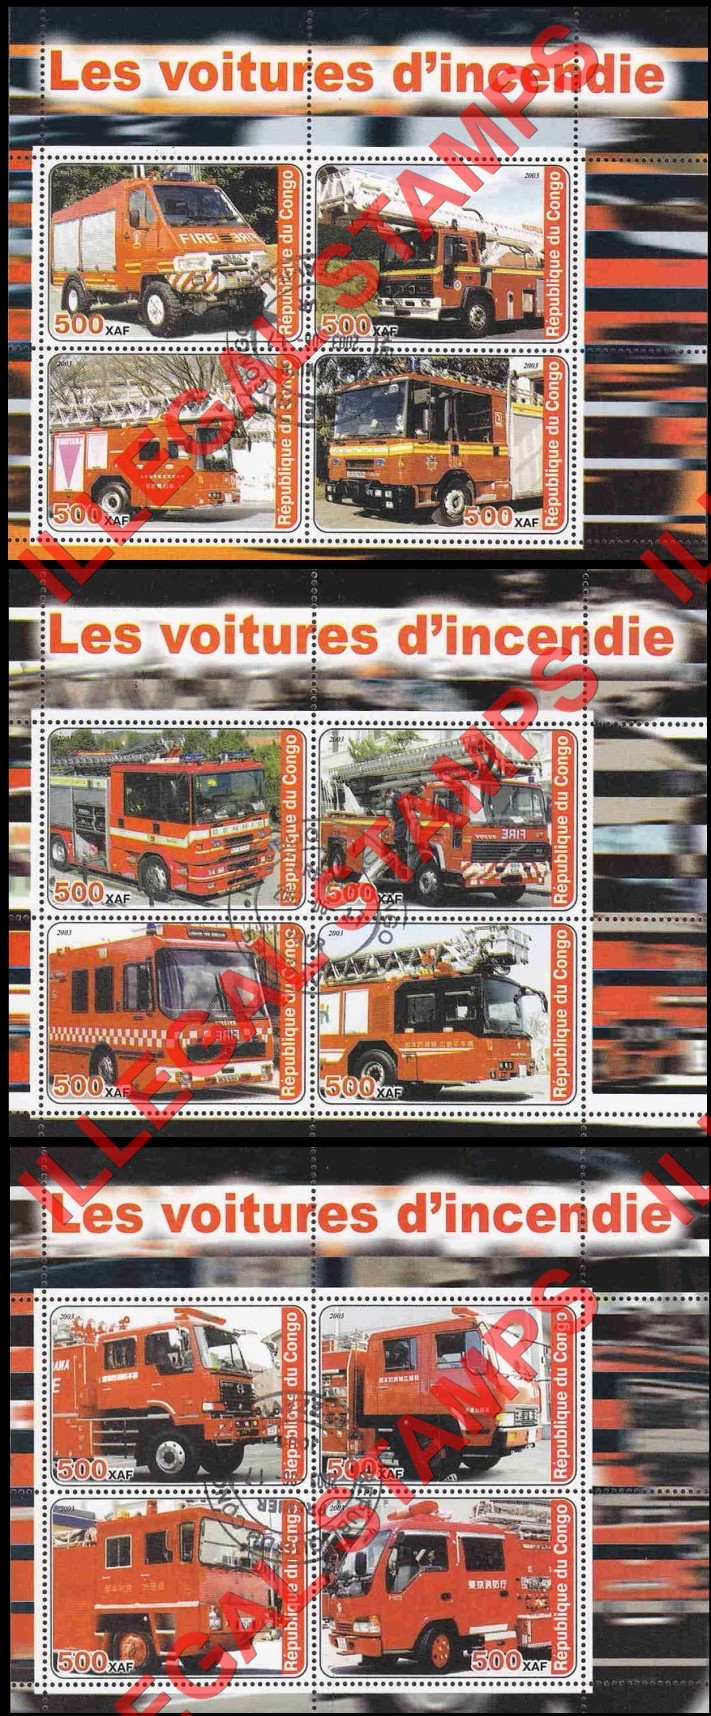 Congo Republic 2003 Fire Engines Illegal Stamp Souvenir Sheets of 4